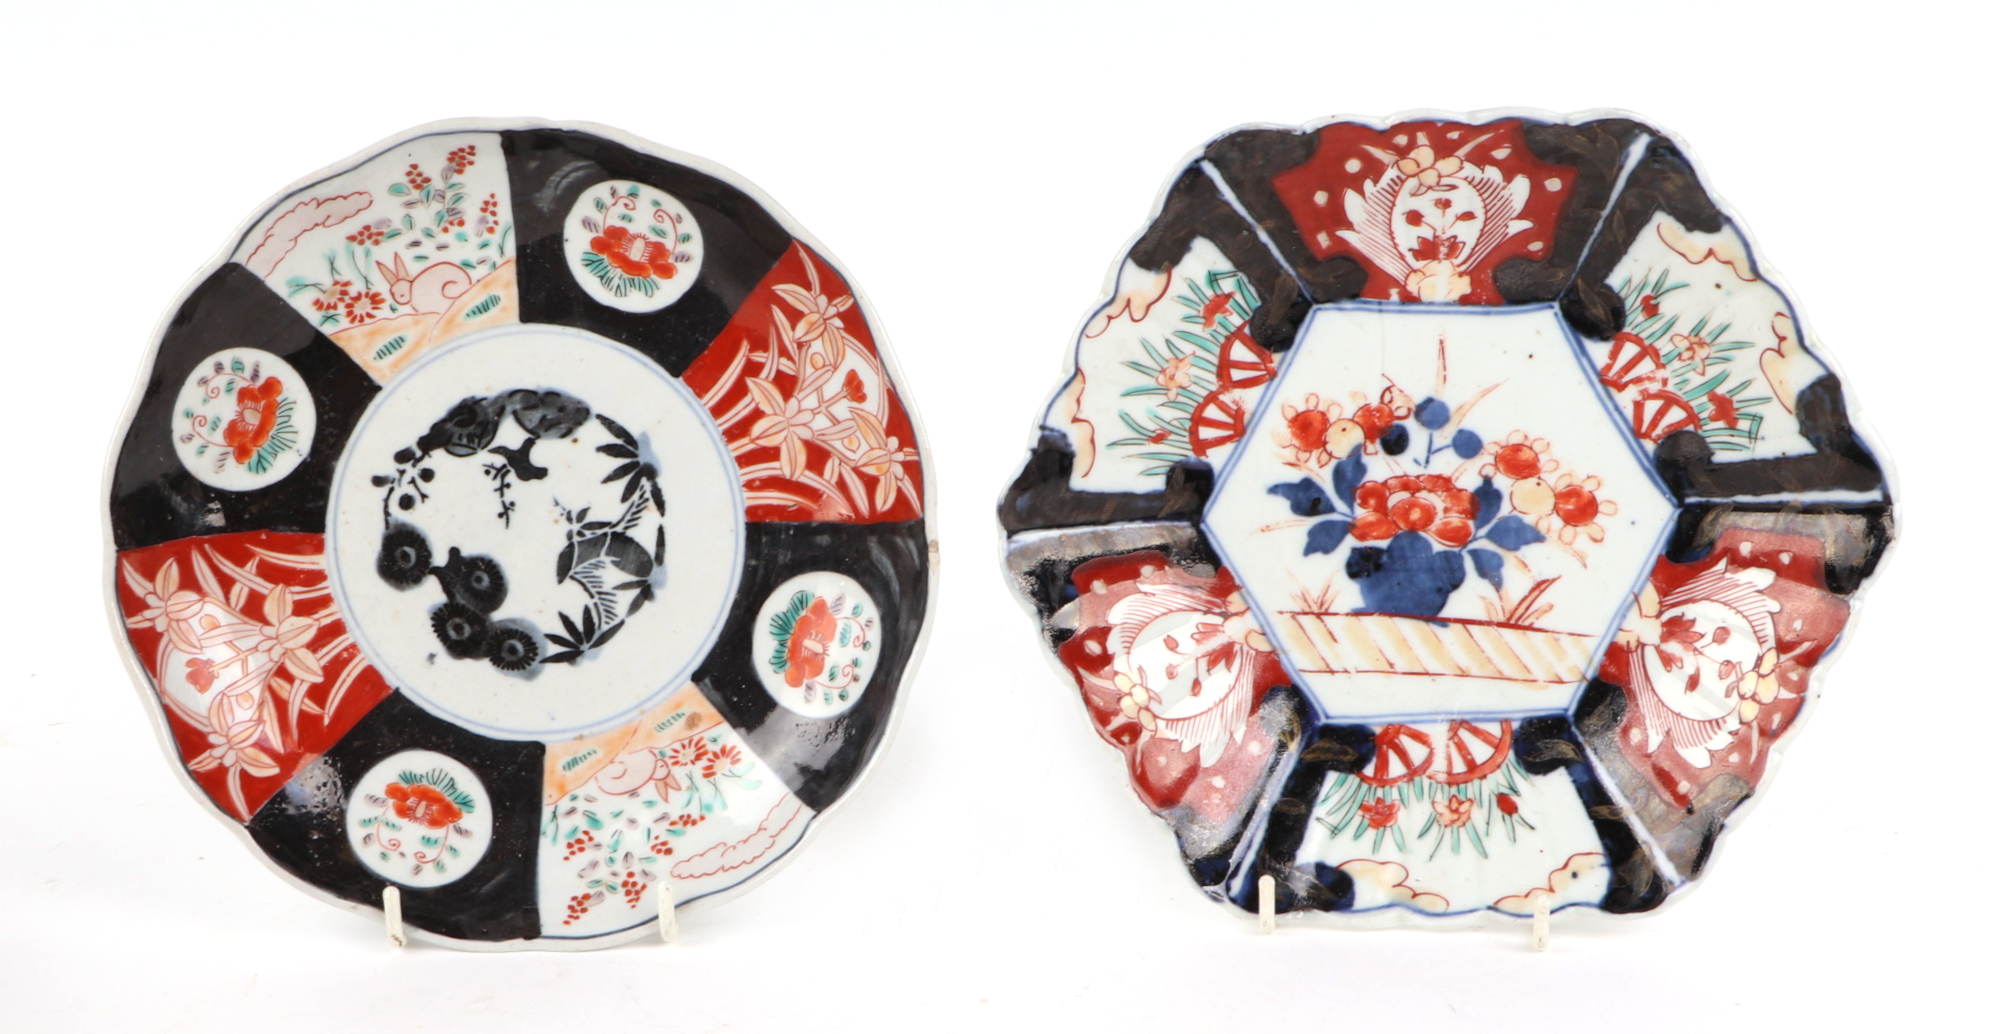 A late 19th century Japanese satsuma hanging bowl, 23cm diameter, a group of Imari plates and bowls, - Image 6 of 6